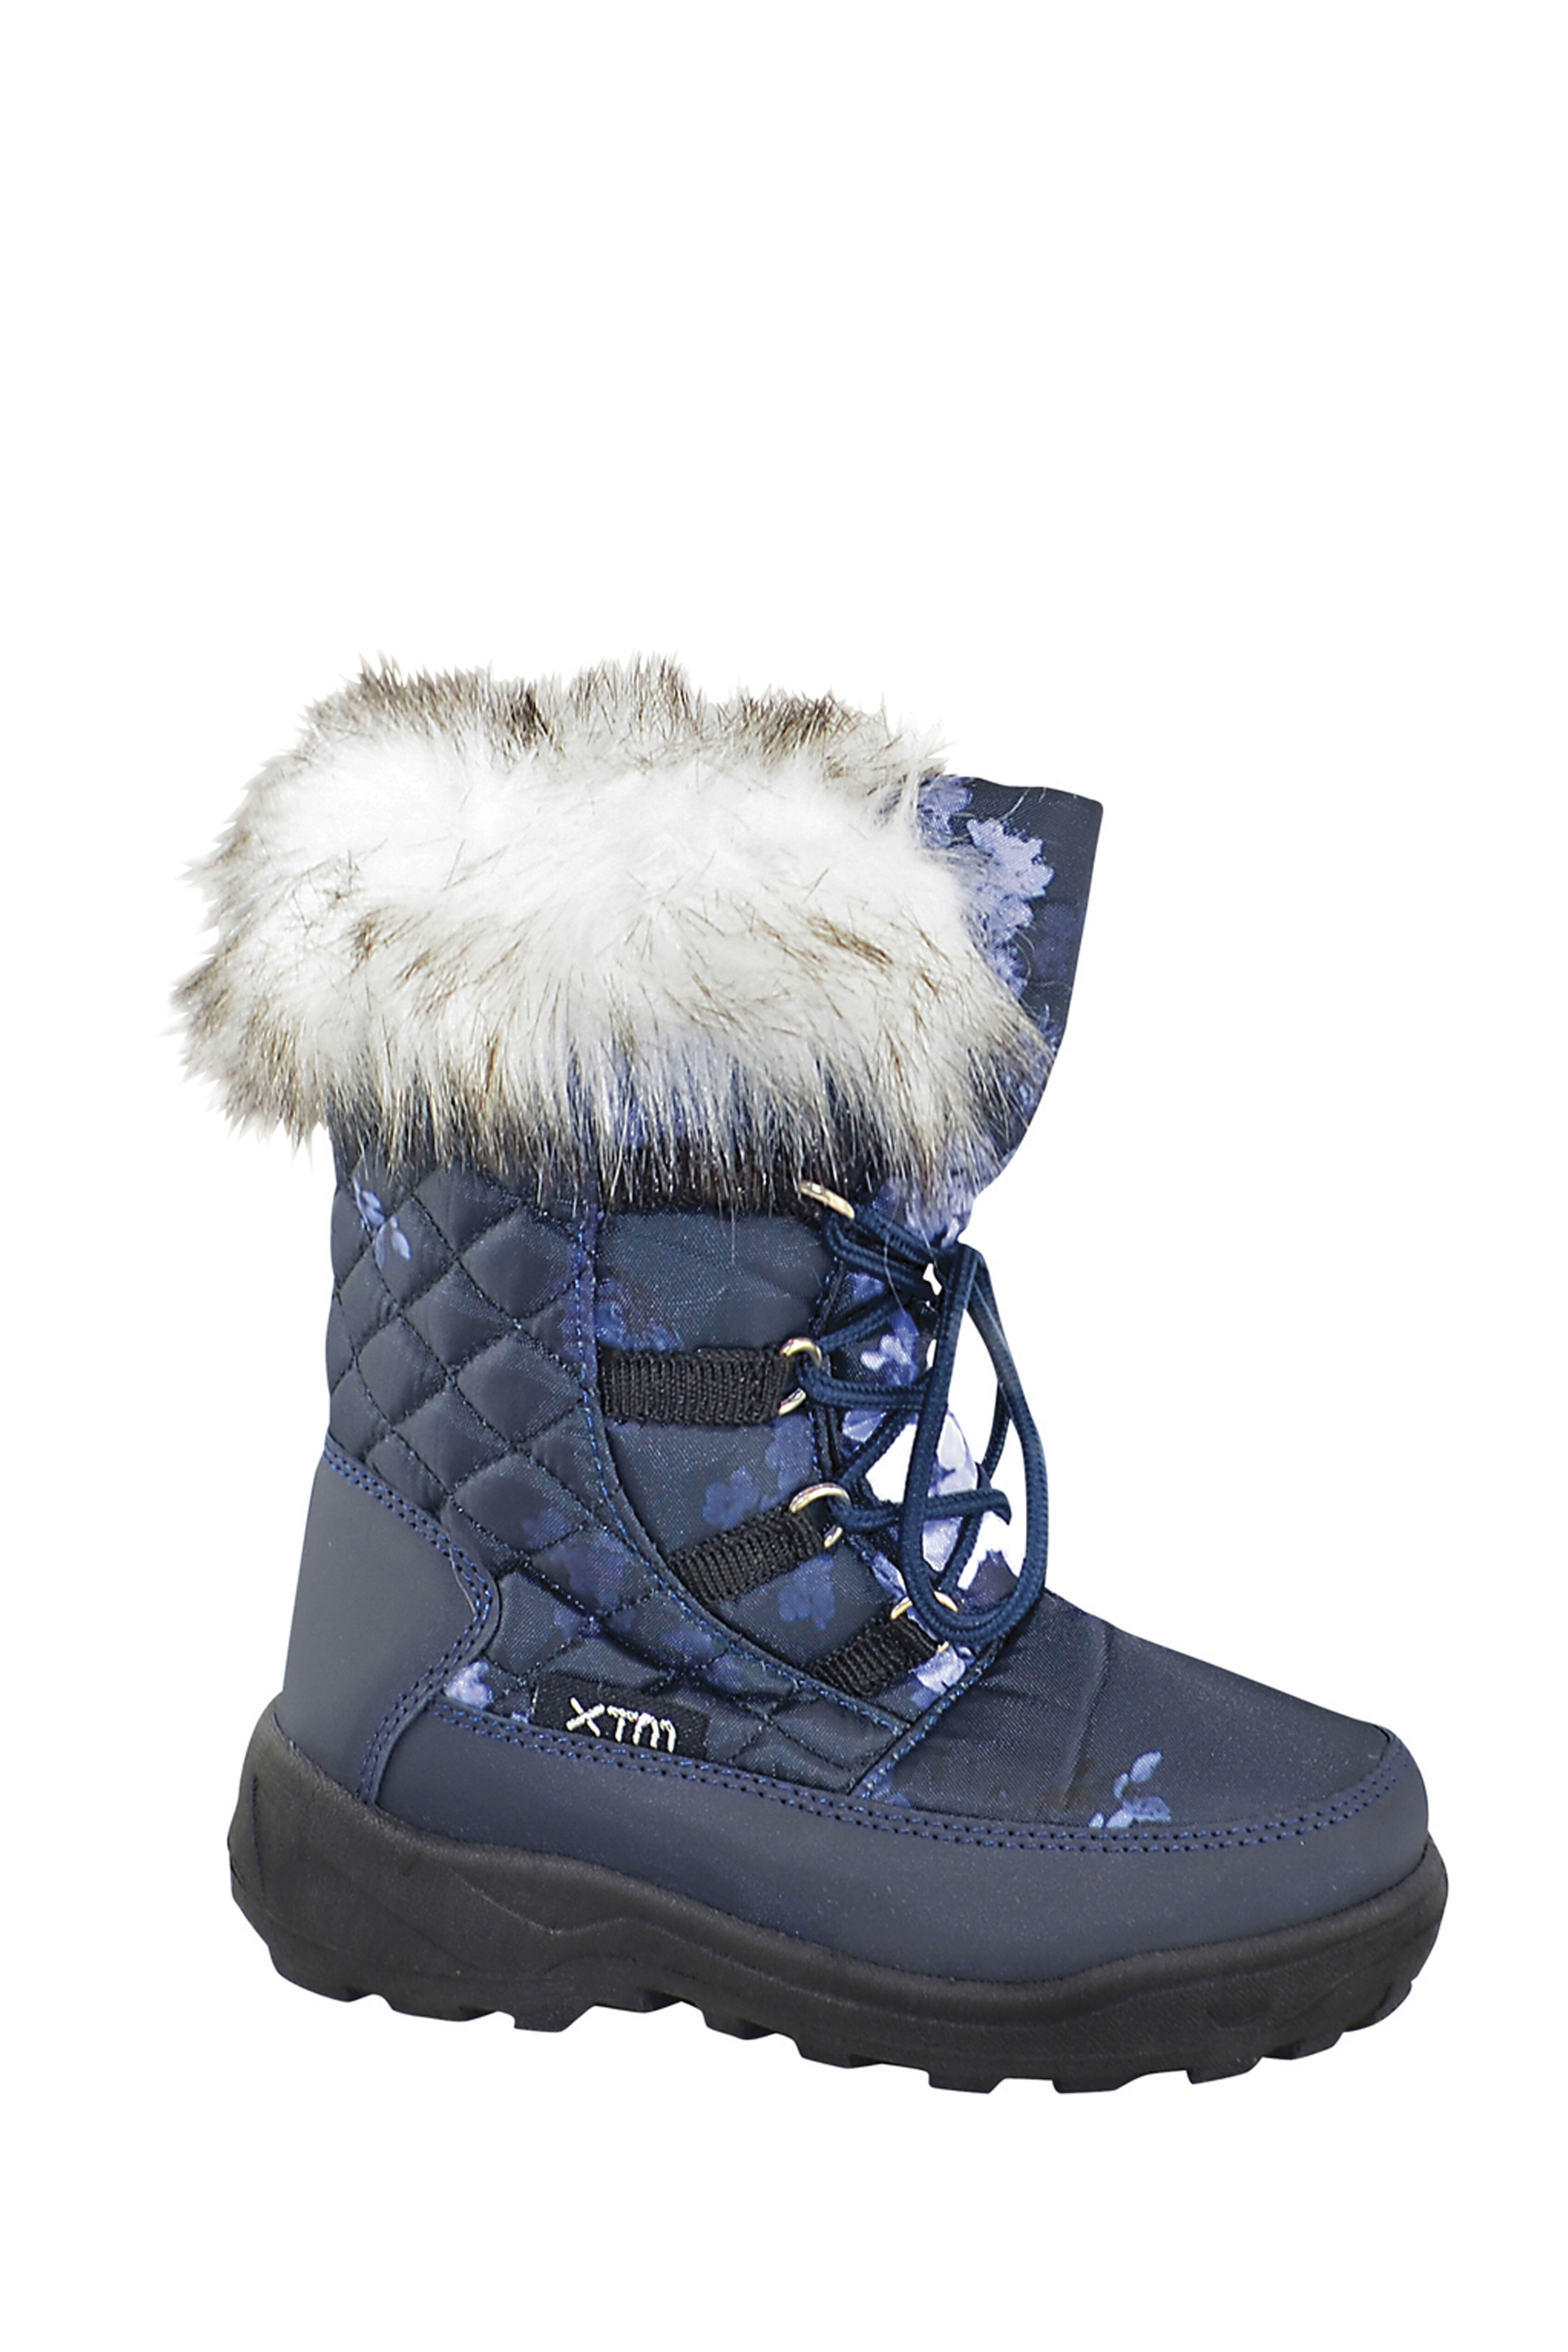 childrens snow boots near me